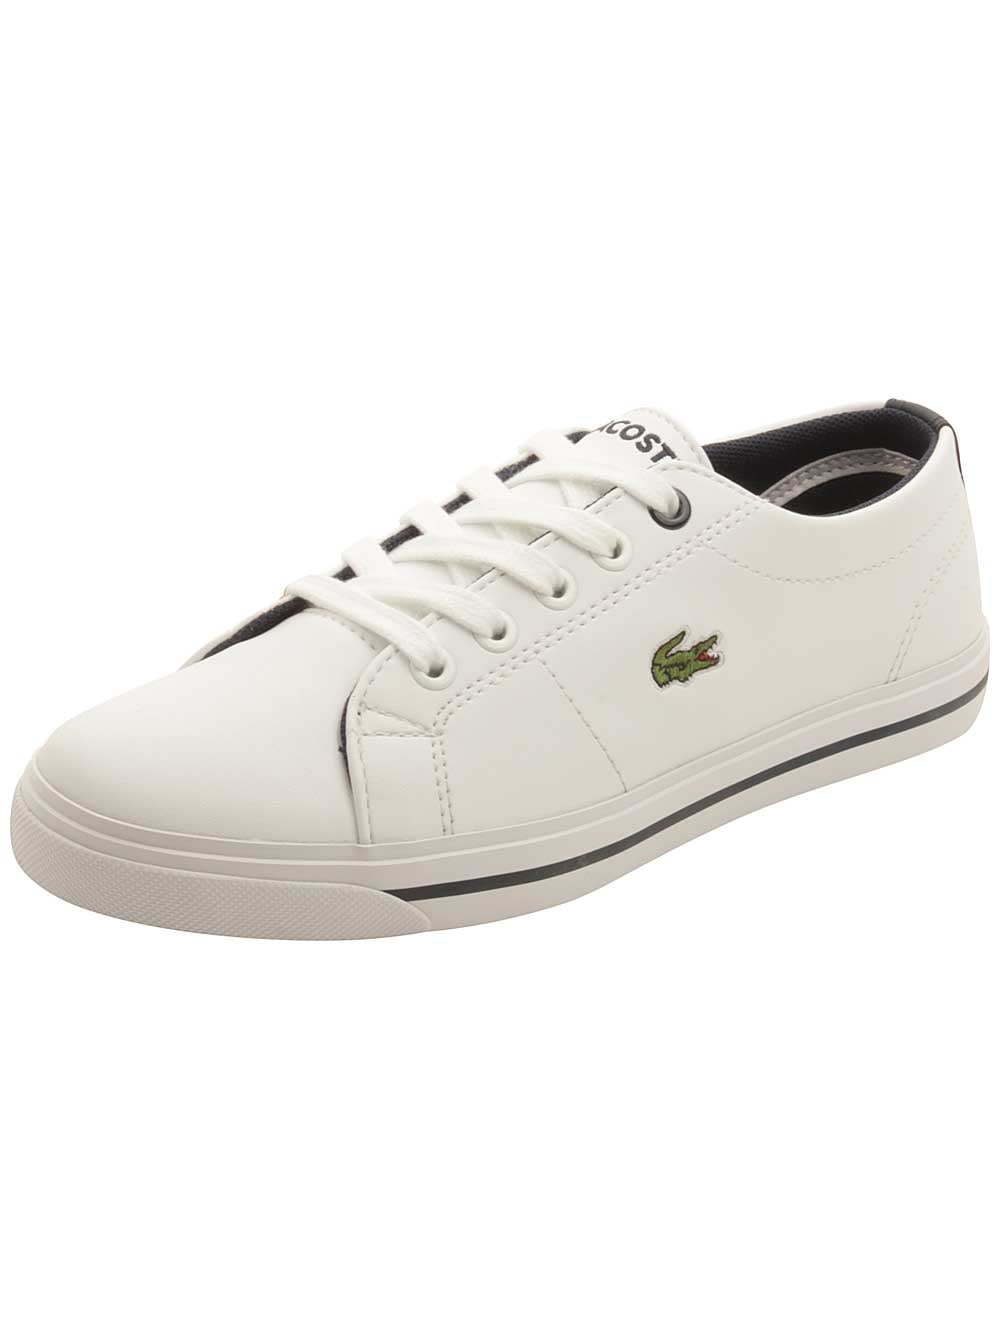 Cushioned Junior Boys Lacoste Riberac 119 Trainers In Navy Lace Fastening 